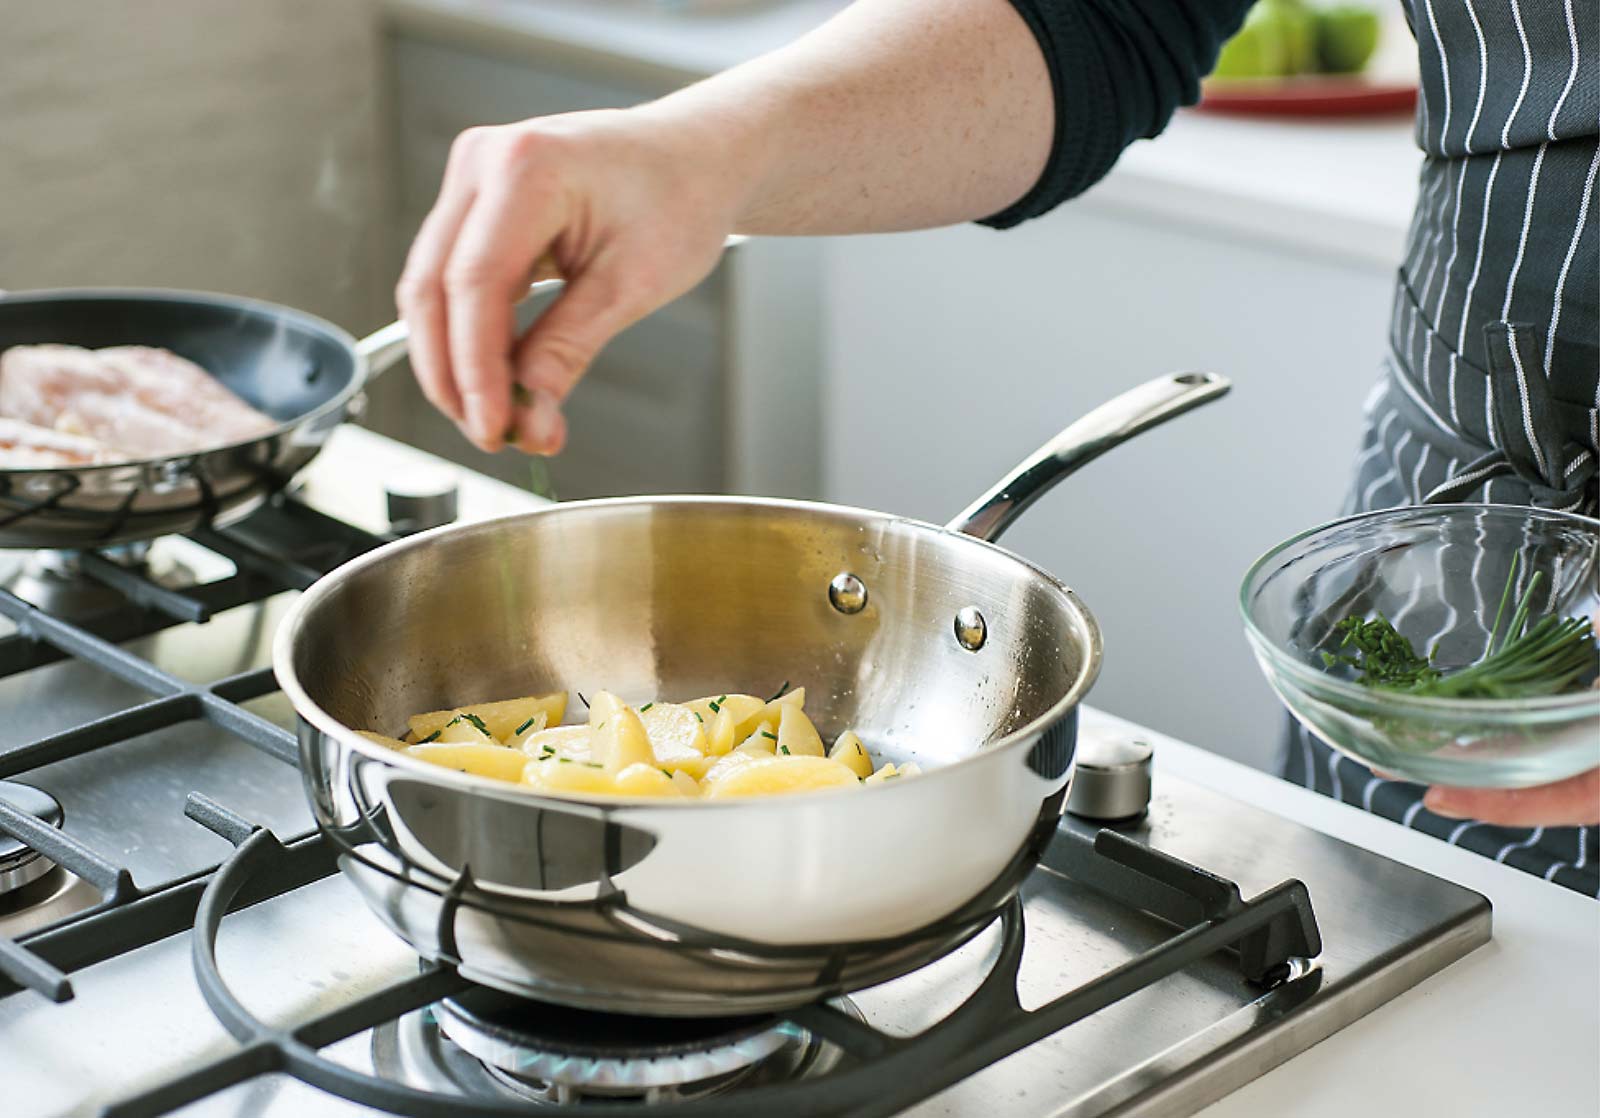 Sorry, You’re Not a Grown-Up If You Don’t Own at Least 13/25 of These Kitchen Things Saucepan